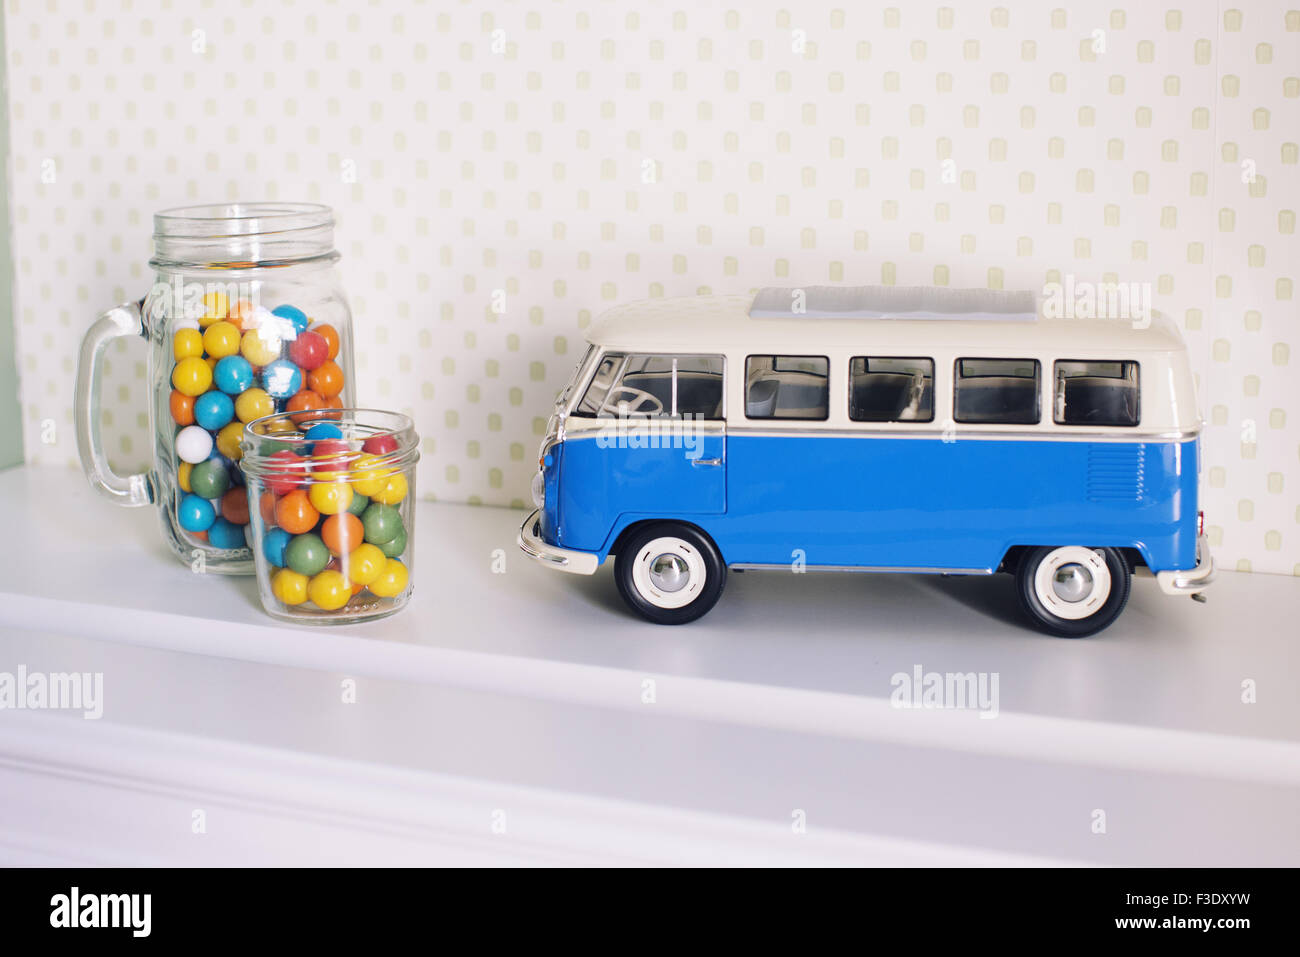 Toy bus and jars of candy Stock Photo